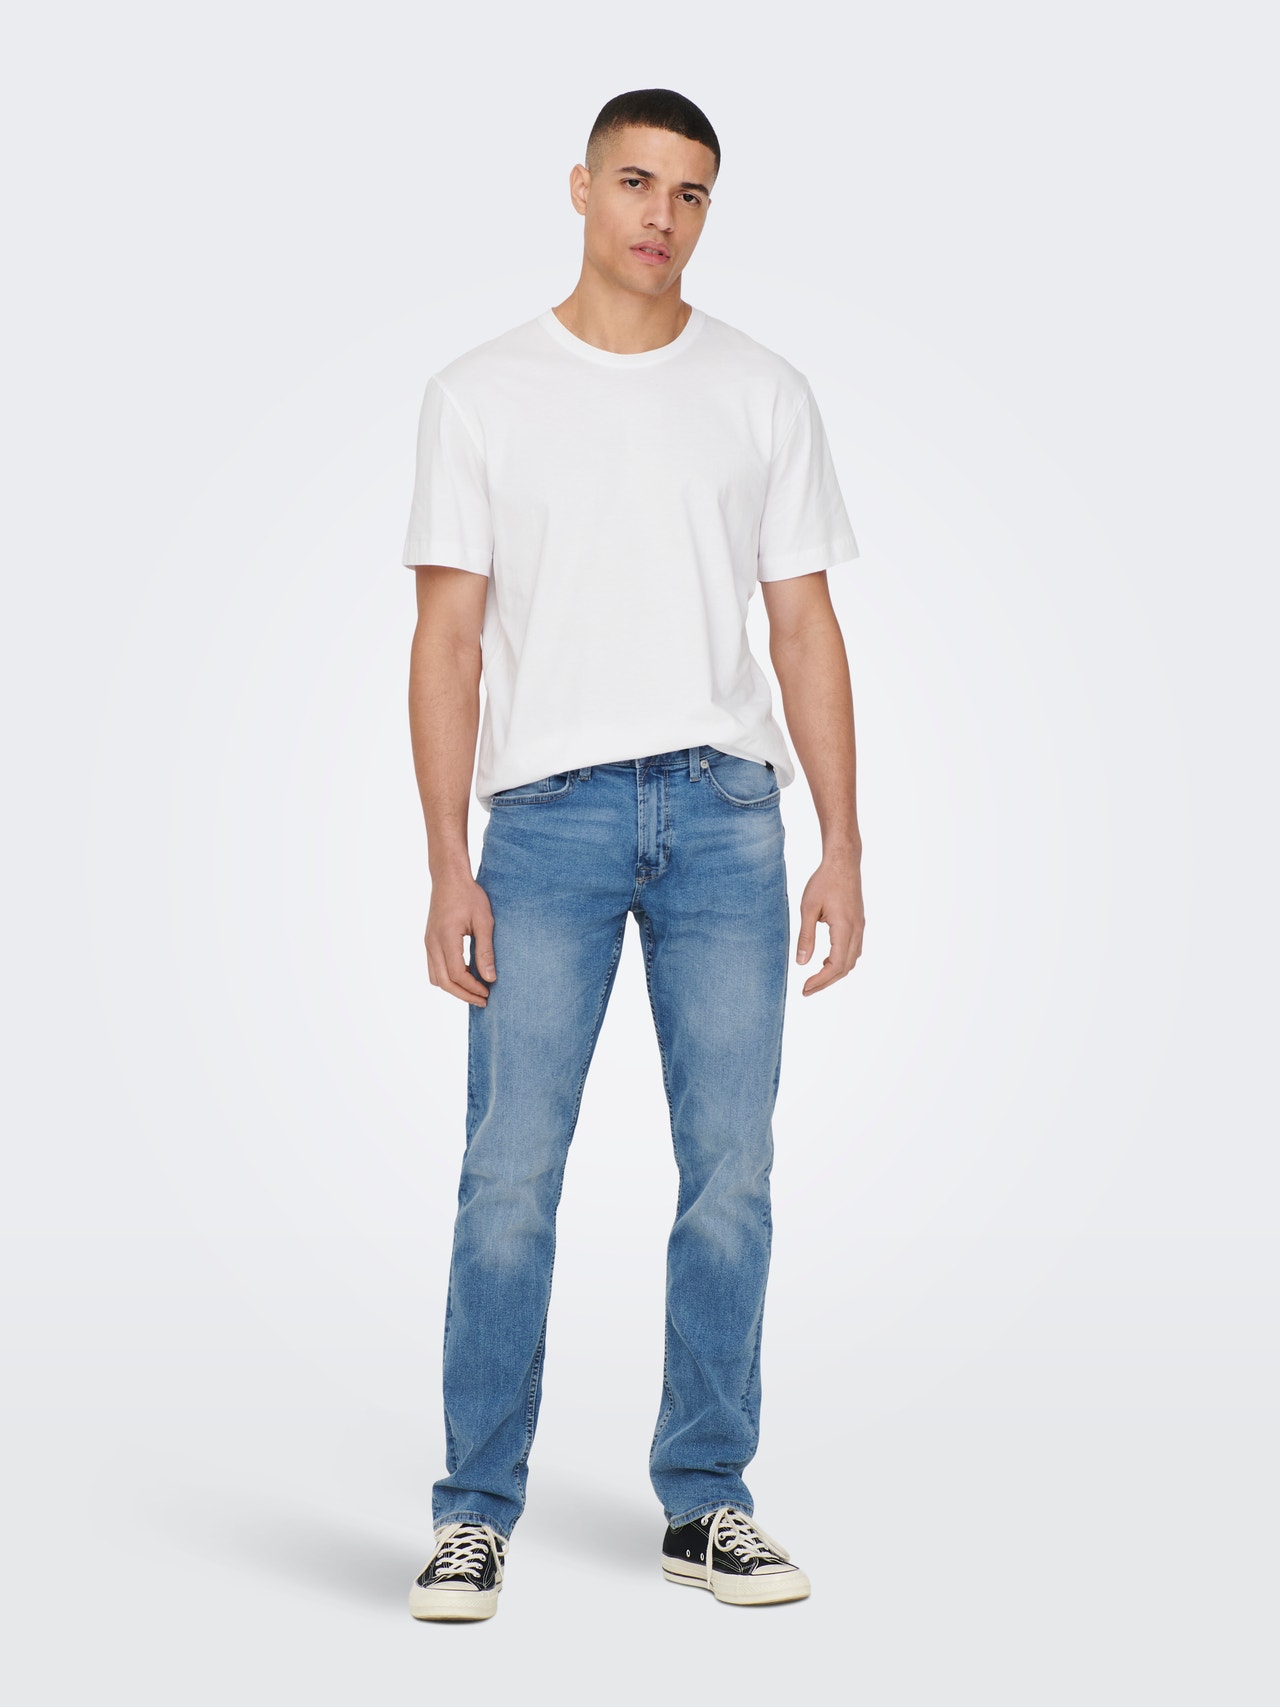 ONLY & SONS O-hals t-shirt -White - 22025208